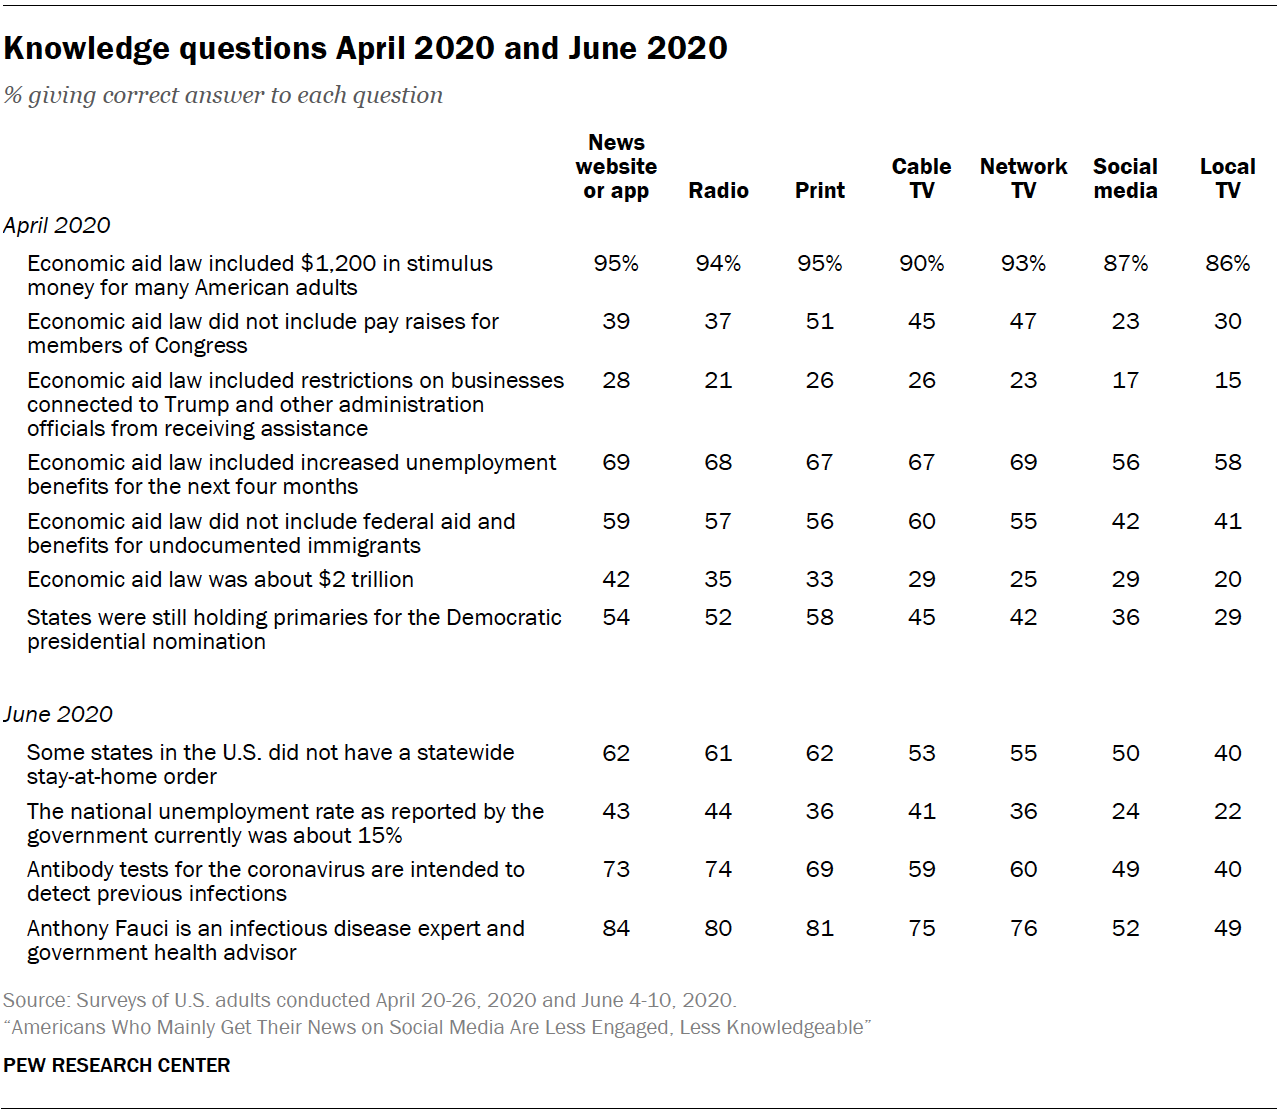 Chart shows knowledge questions April 2020 and June 2020